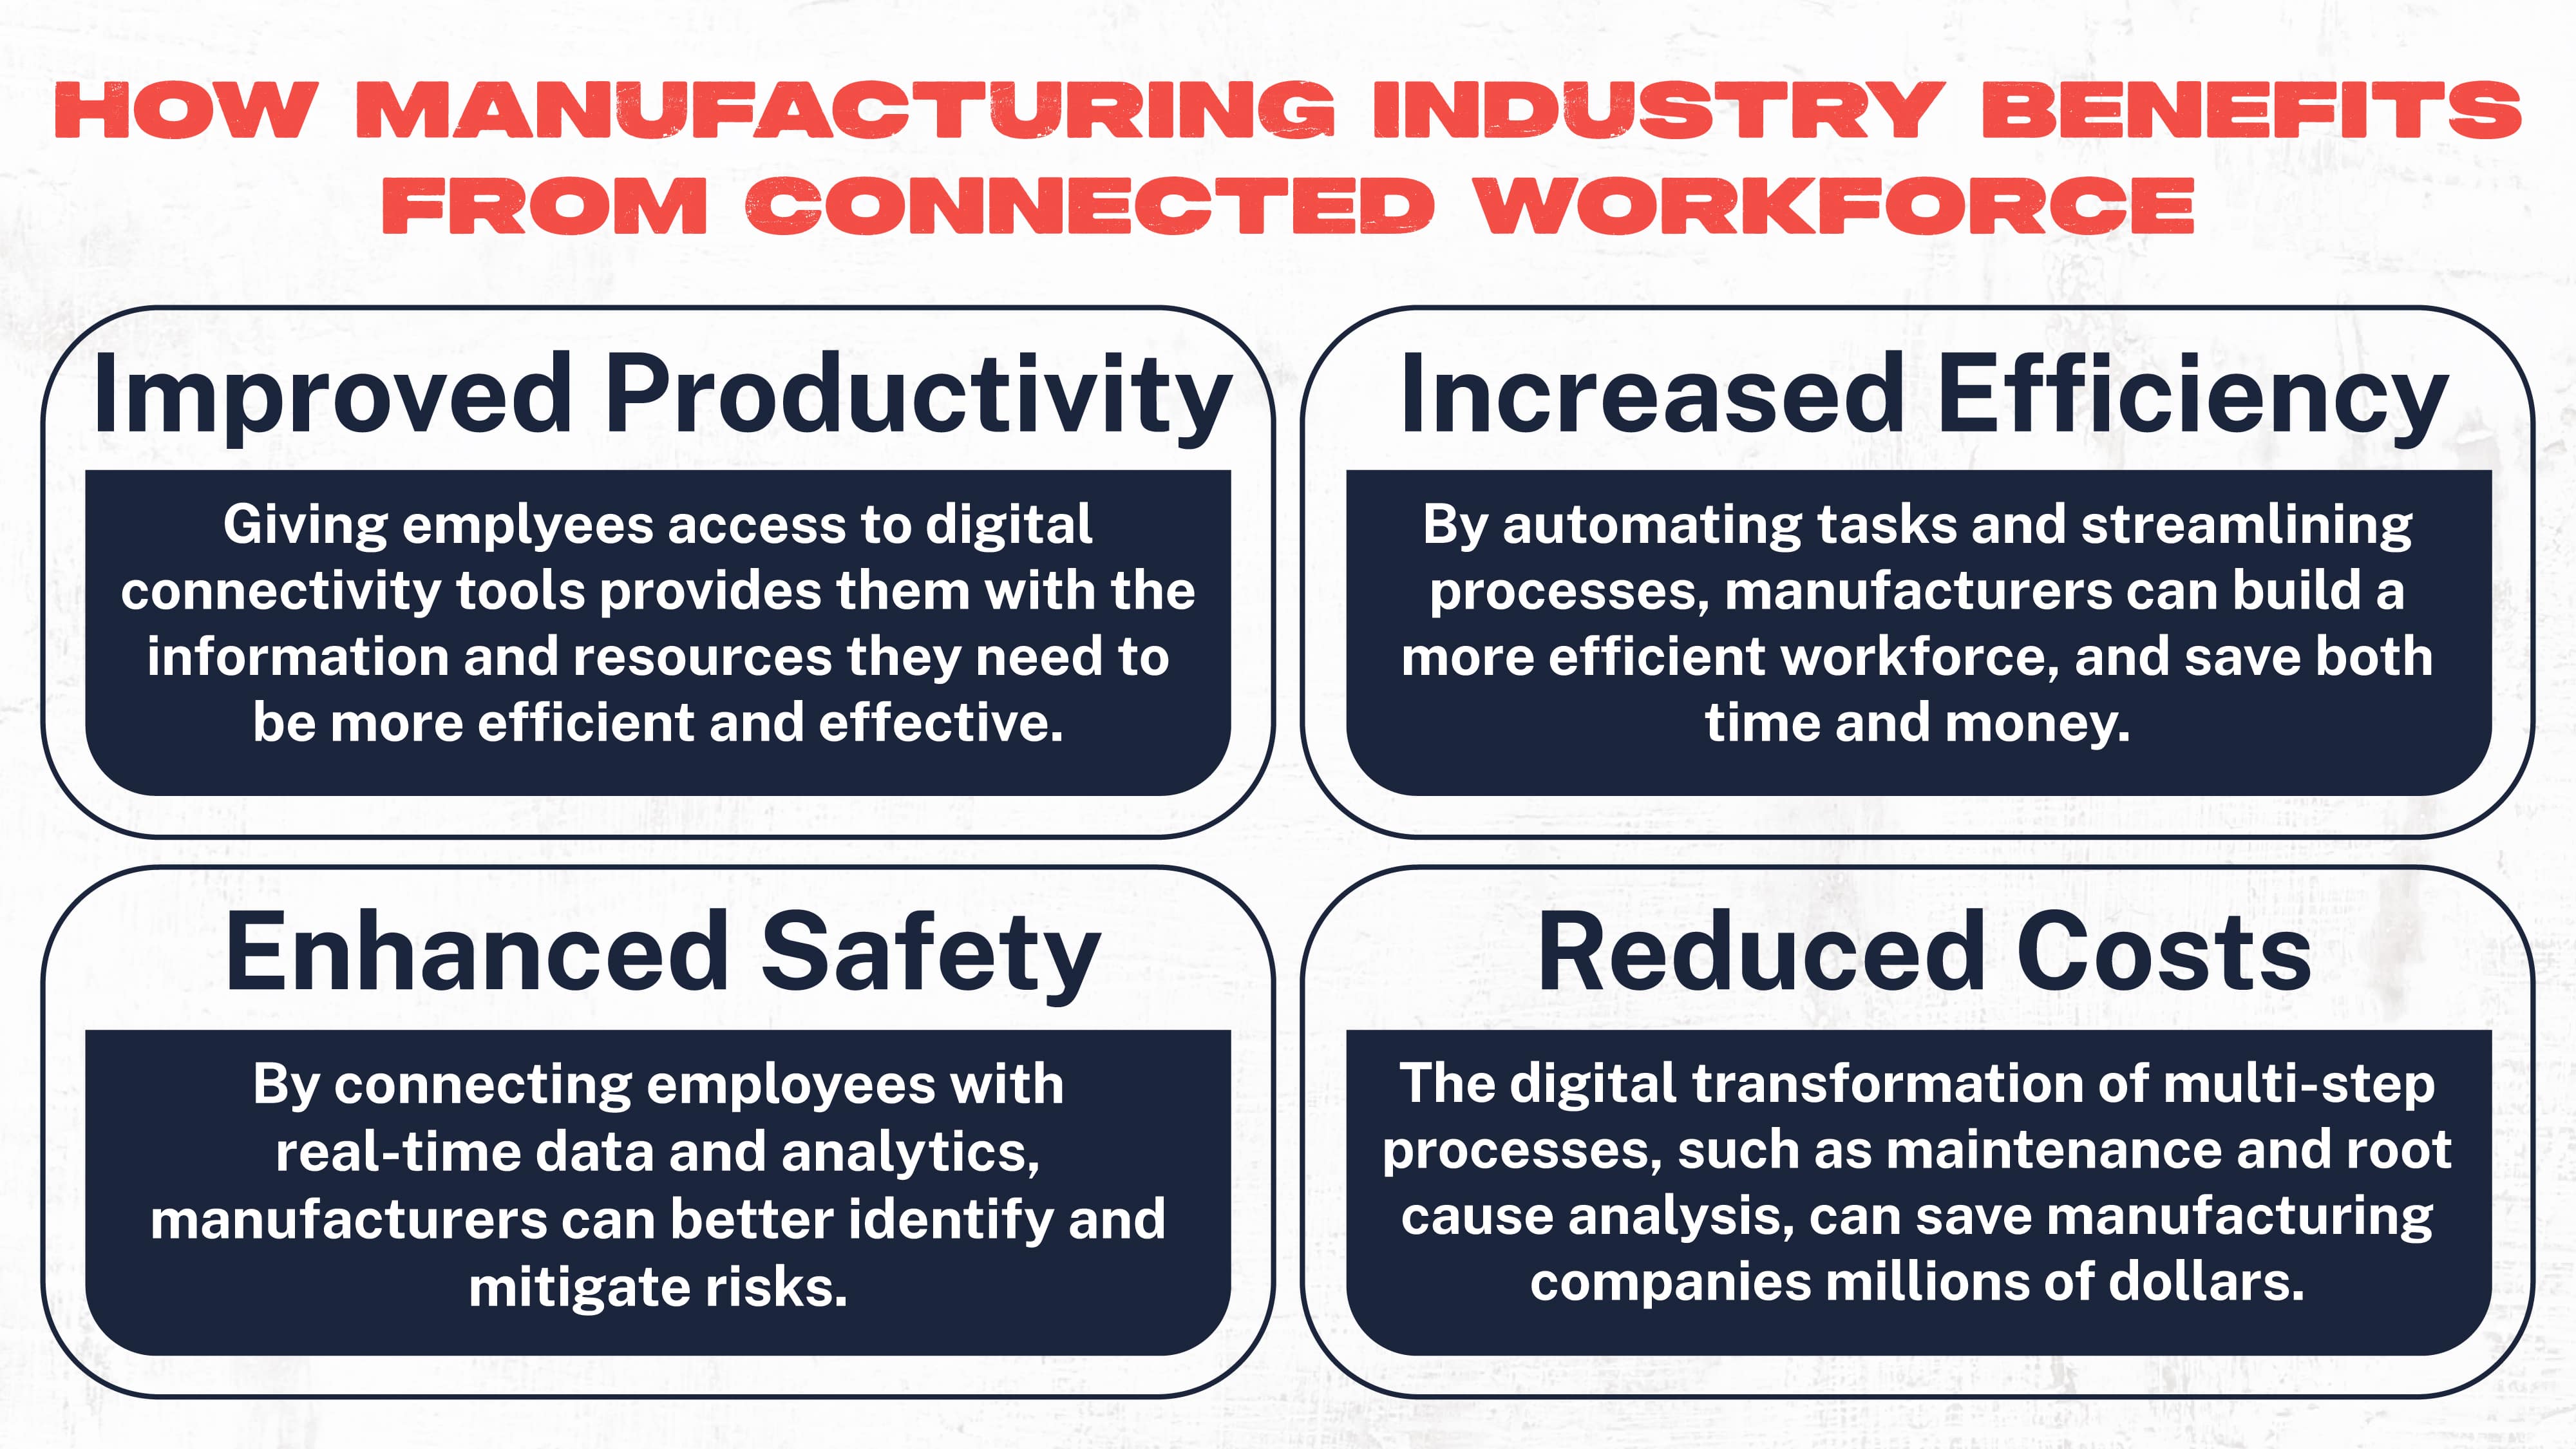 How Manufacturing Industry Benefits from Connected Workforce